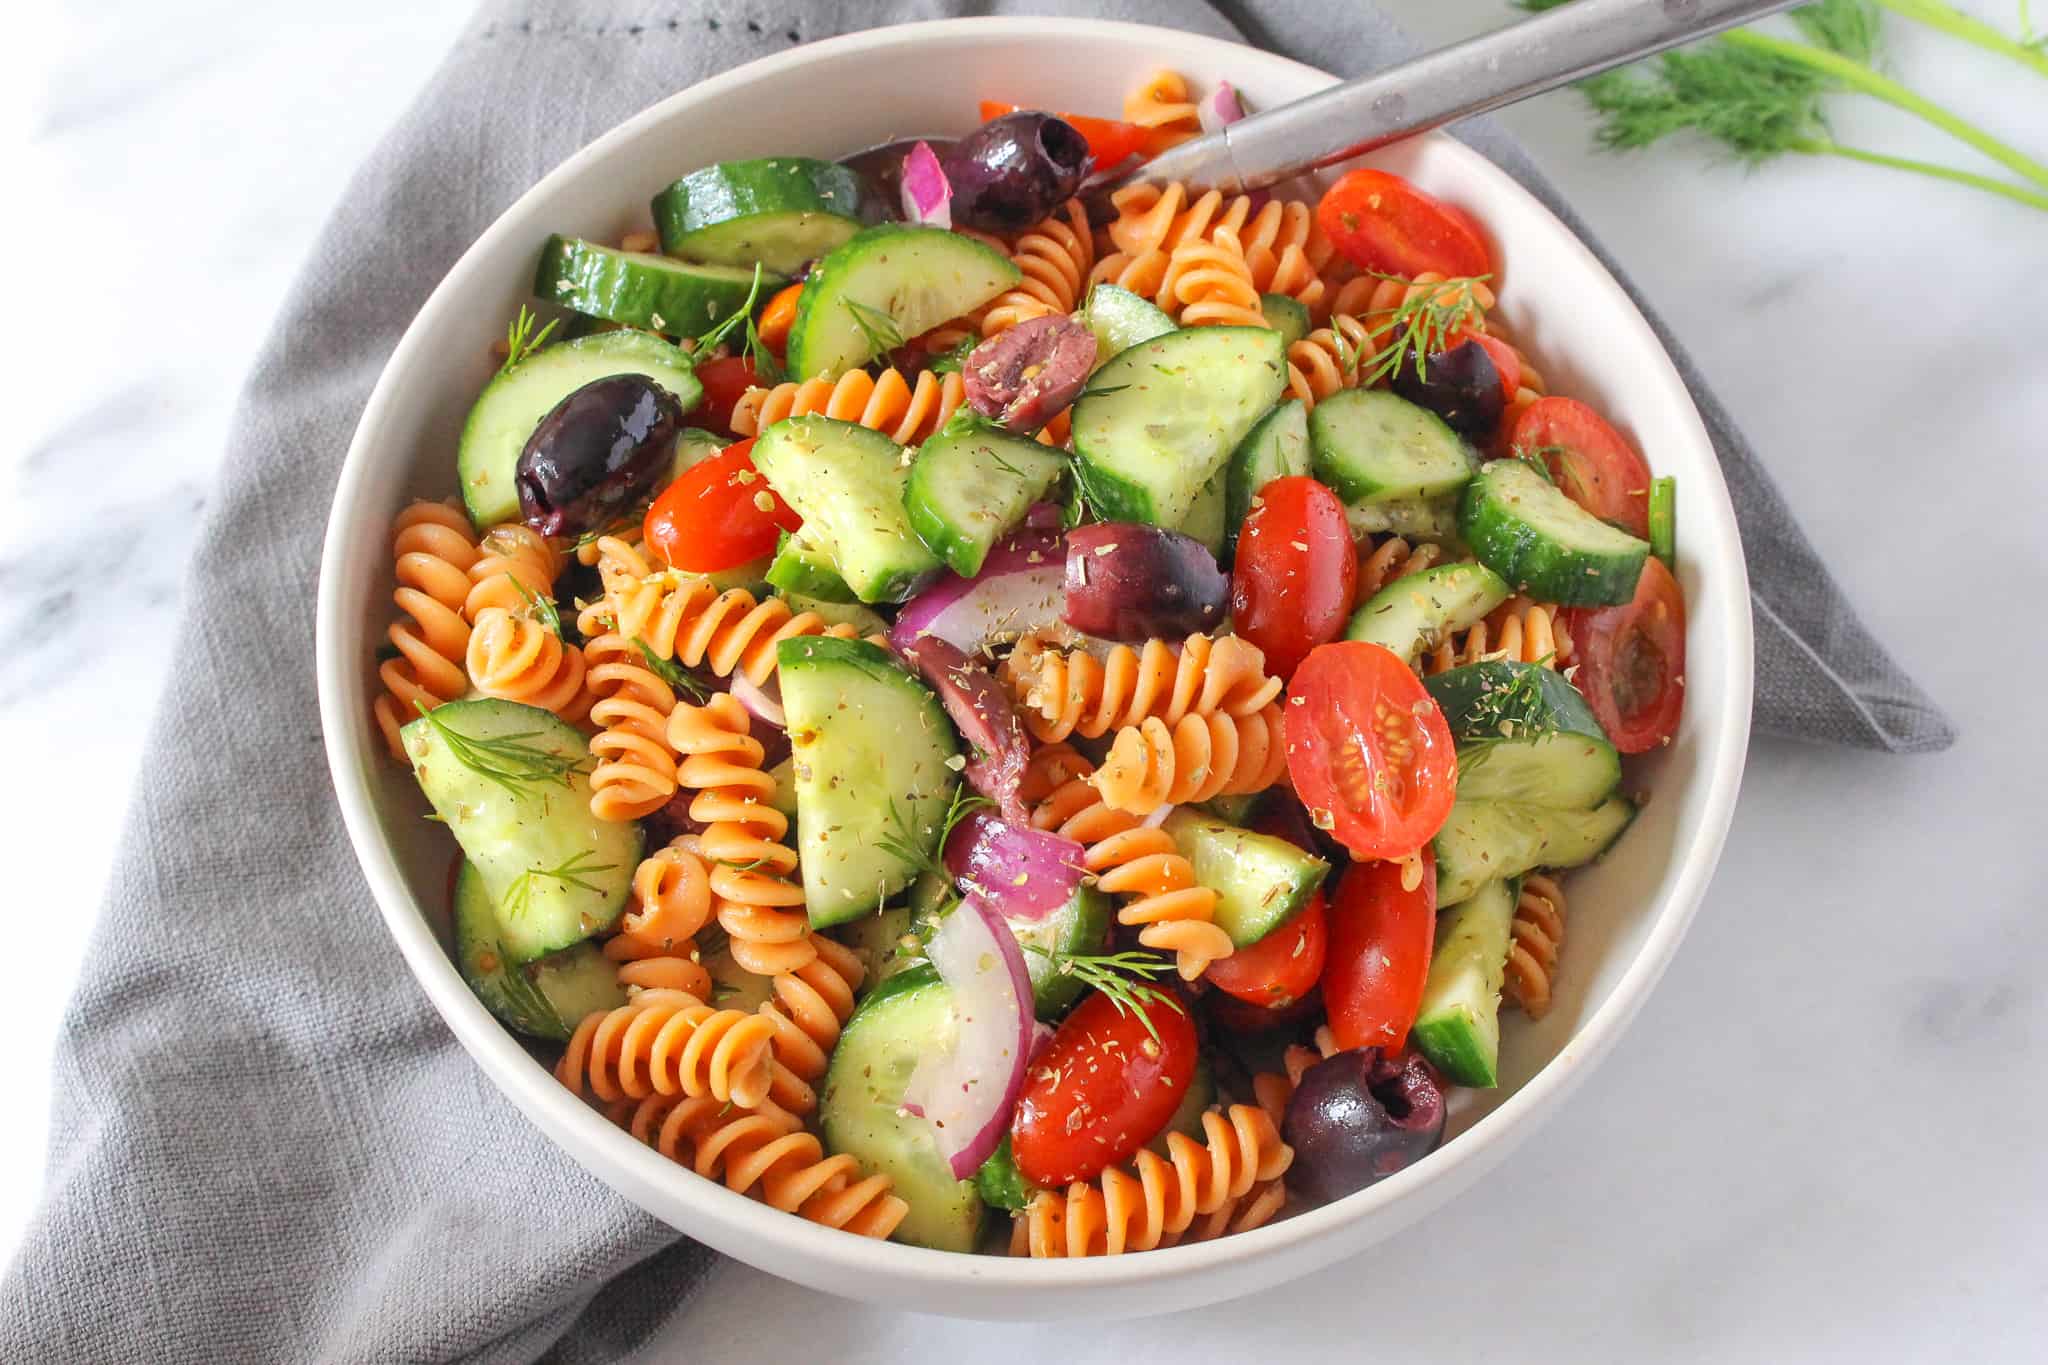 Gluten Free Red Lentil Pasta and Vegetable Salad Cups